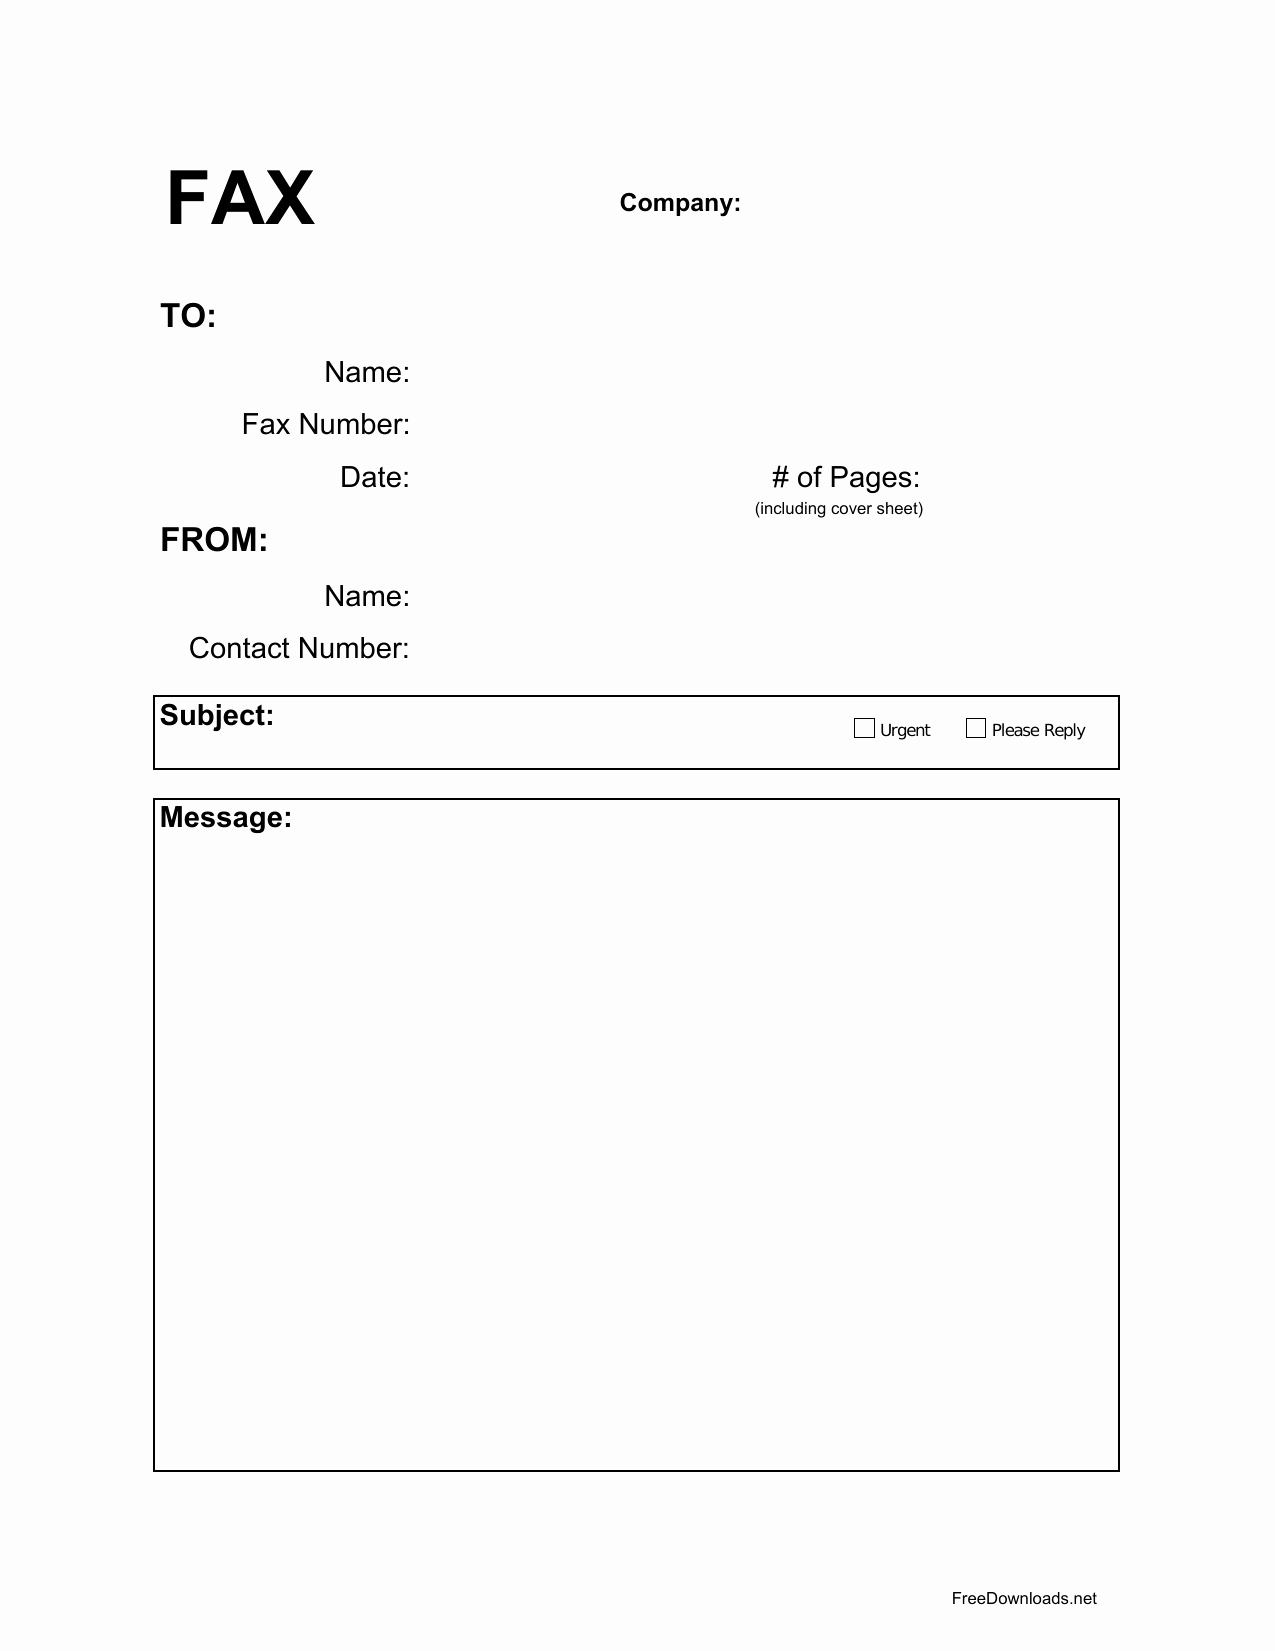 Free Downloads Fax Cover Sheet Elegant Download Fax Cover Sheet Template Pdf Rtf